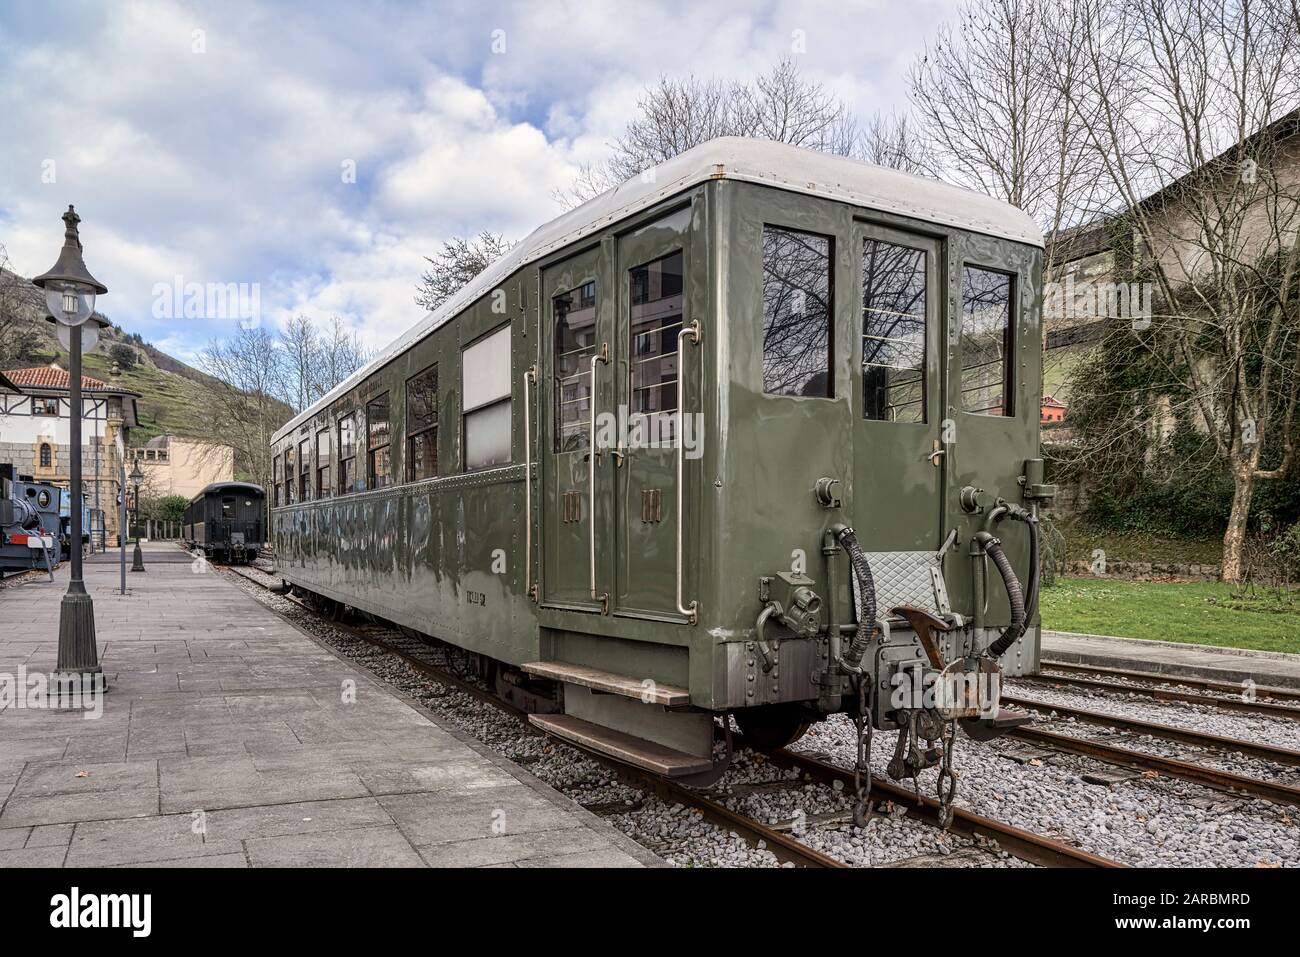 Old train car in the Basque Railway Museum one of the most important of its kind in Europe. Railway history of Euskadi in Azpeitia, Gipuzkoa, Spain Stock Photo